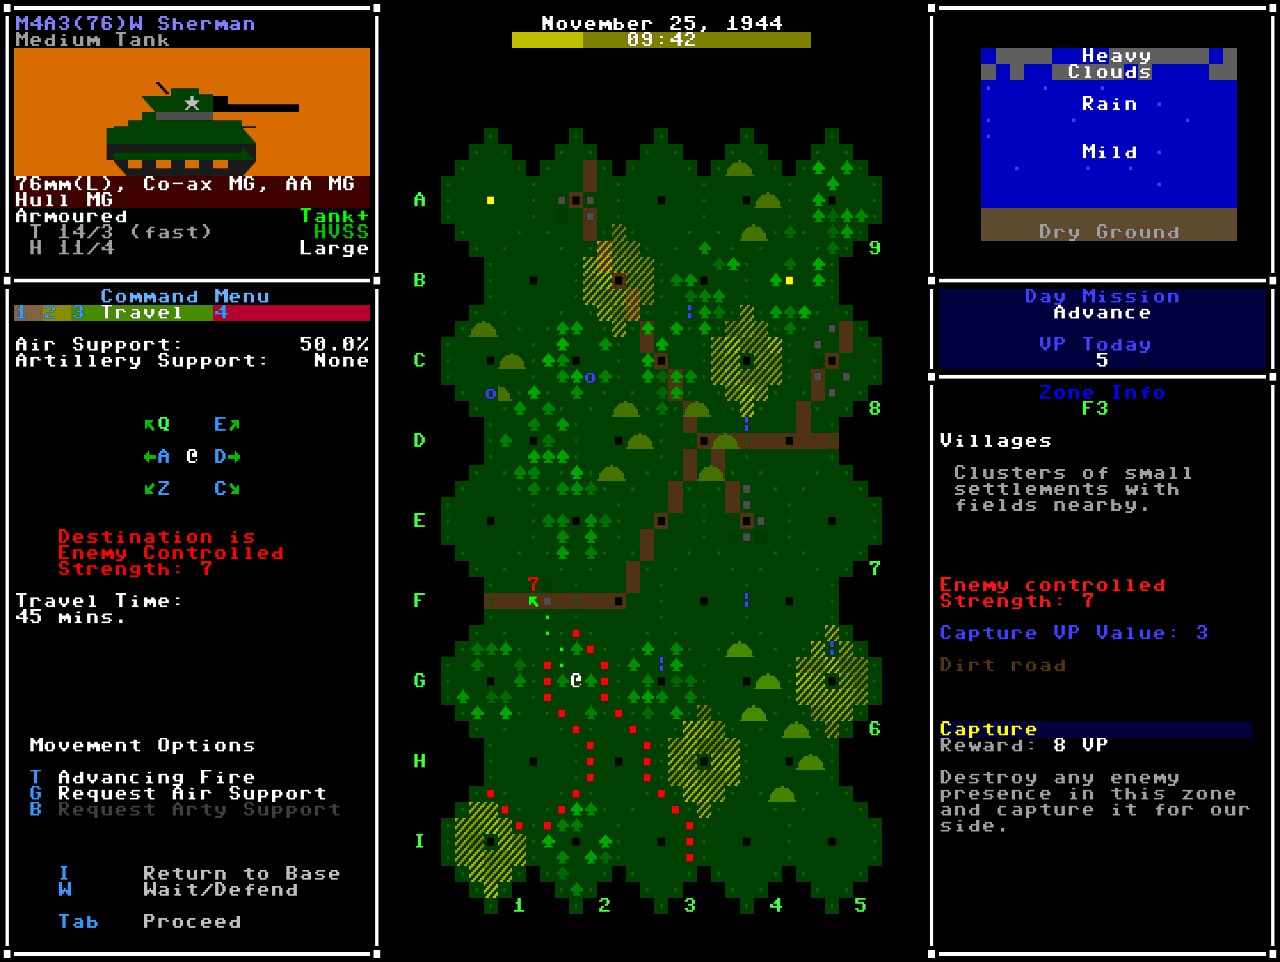 Armoured Commander II - Survival Tips and Tricks How to Increase Tank Commanders in Game - 2. Risk vs. Reward - Moving on the terrain overview map - FF4B8B1